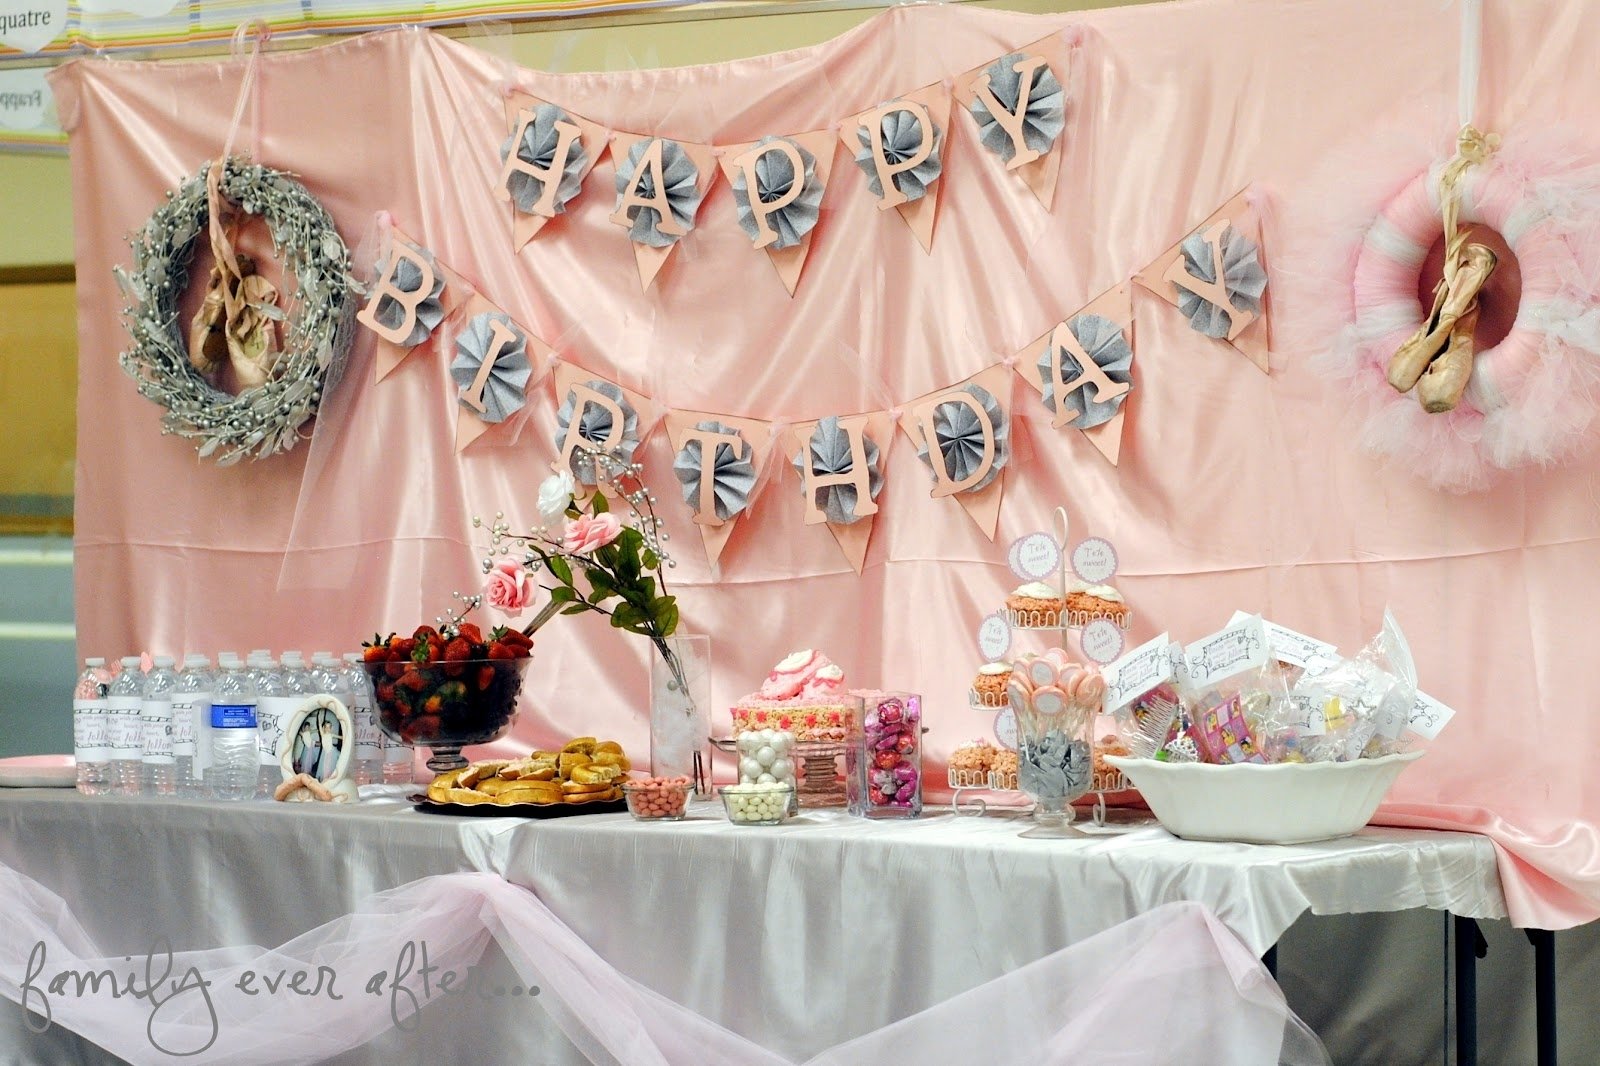 10 Most Popular Ideas For Girl Birthday Party 50 birthday party themes for girls i heart nap time 7 2022